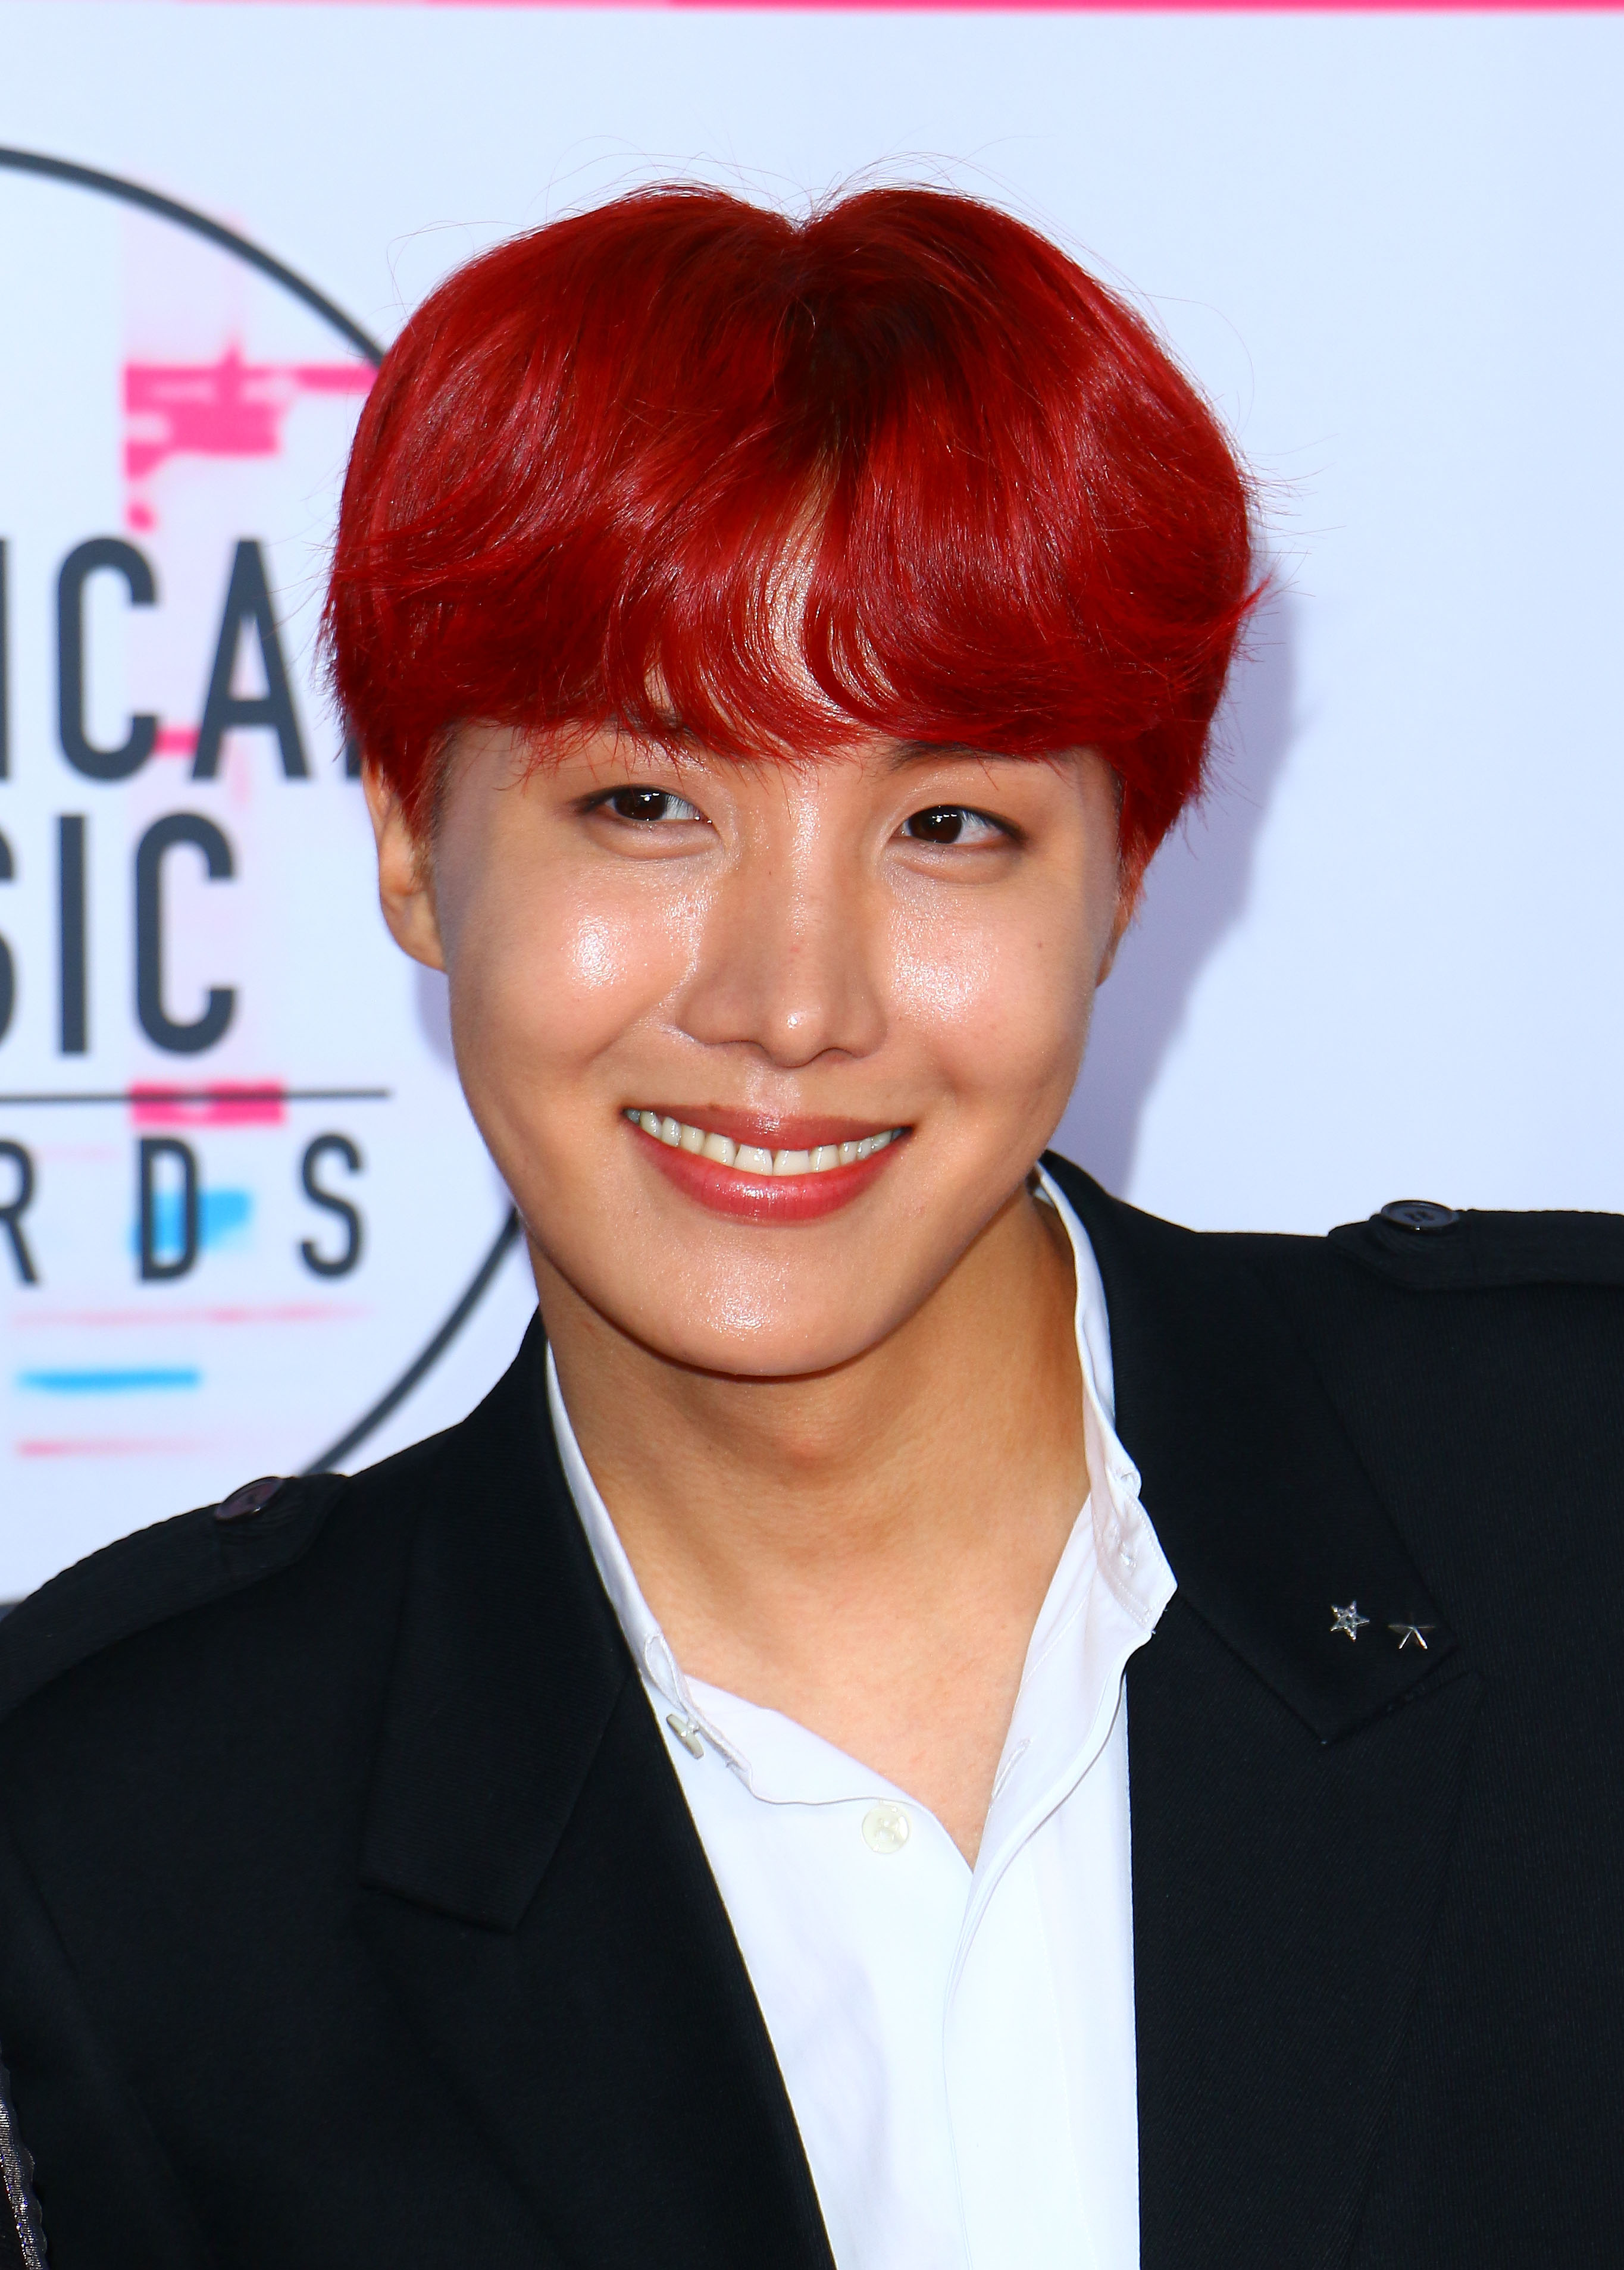 Boy Crush: BTS' J-Hope Is More Than Just Our 'Hope', He's The